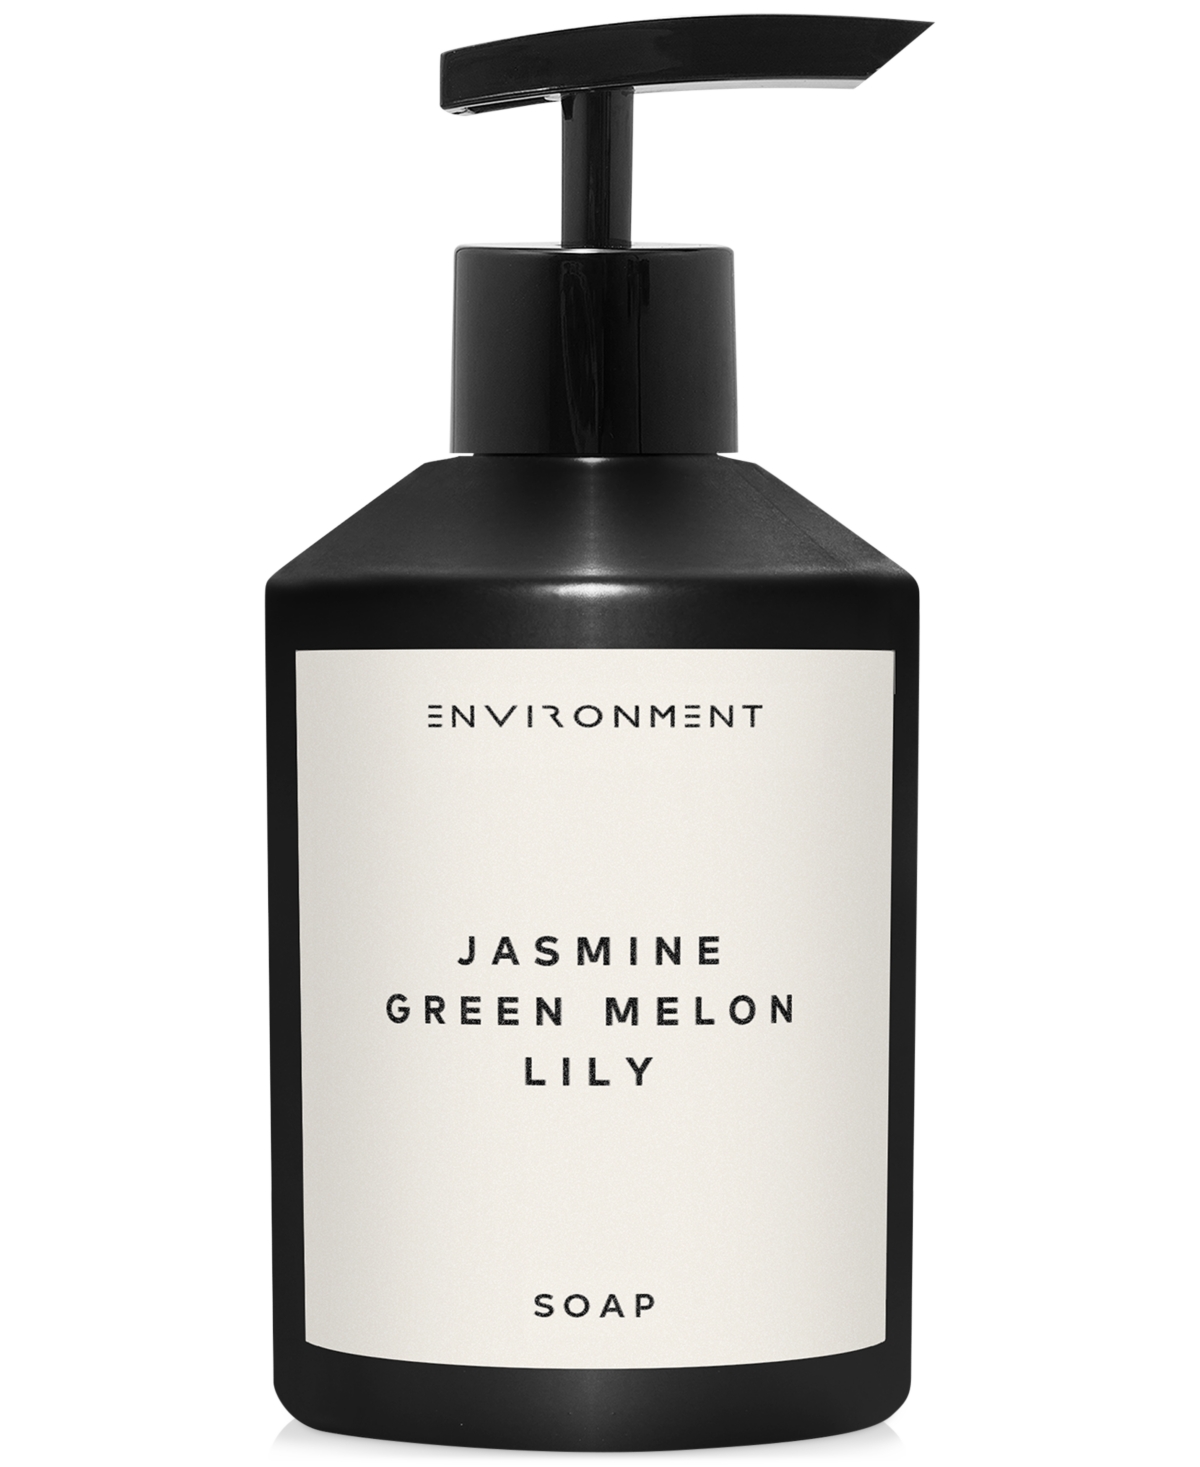 Jasmine, Green Melon & Lily Hand Soap (Inspired by 5-Star Luxury Hotels), 10 oz.